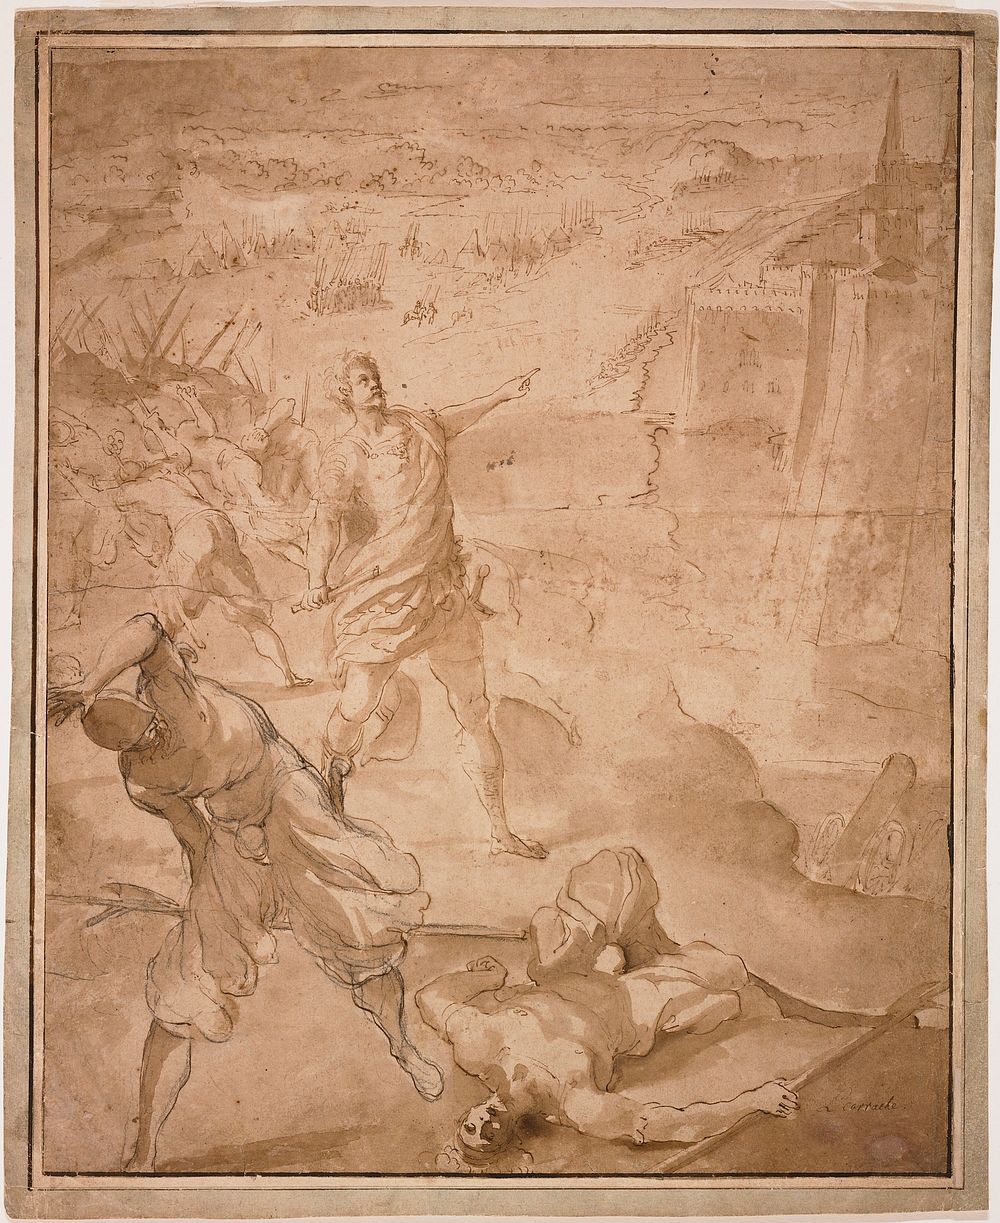 battle scene with soldiers fighting hand-to-hand at left in middle ground; two soldiers--one fallen--in foreground;…